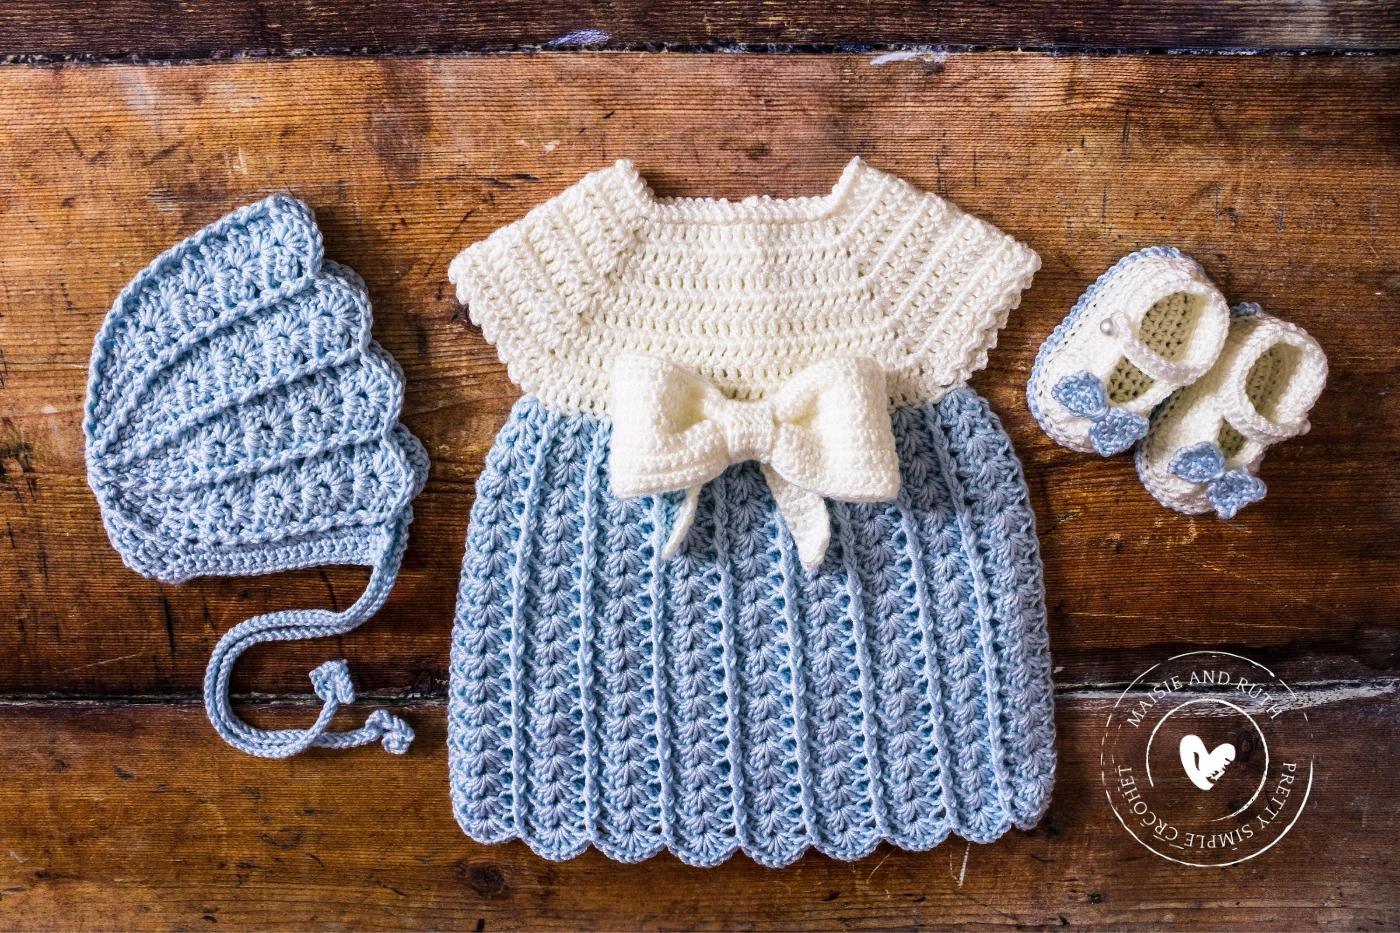 Bonnet with baby dress